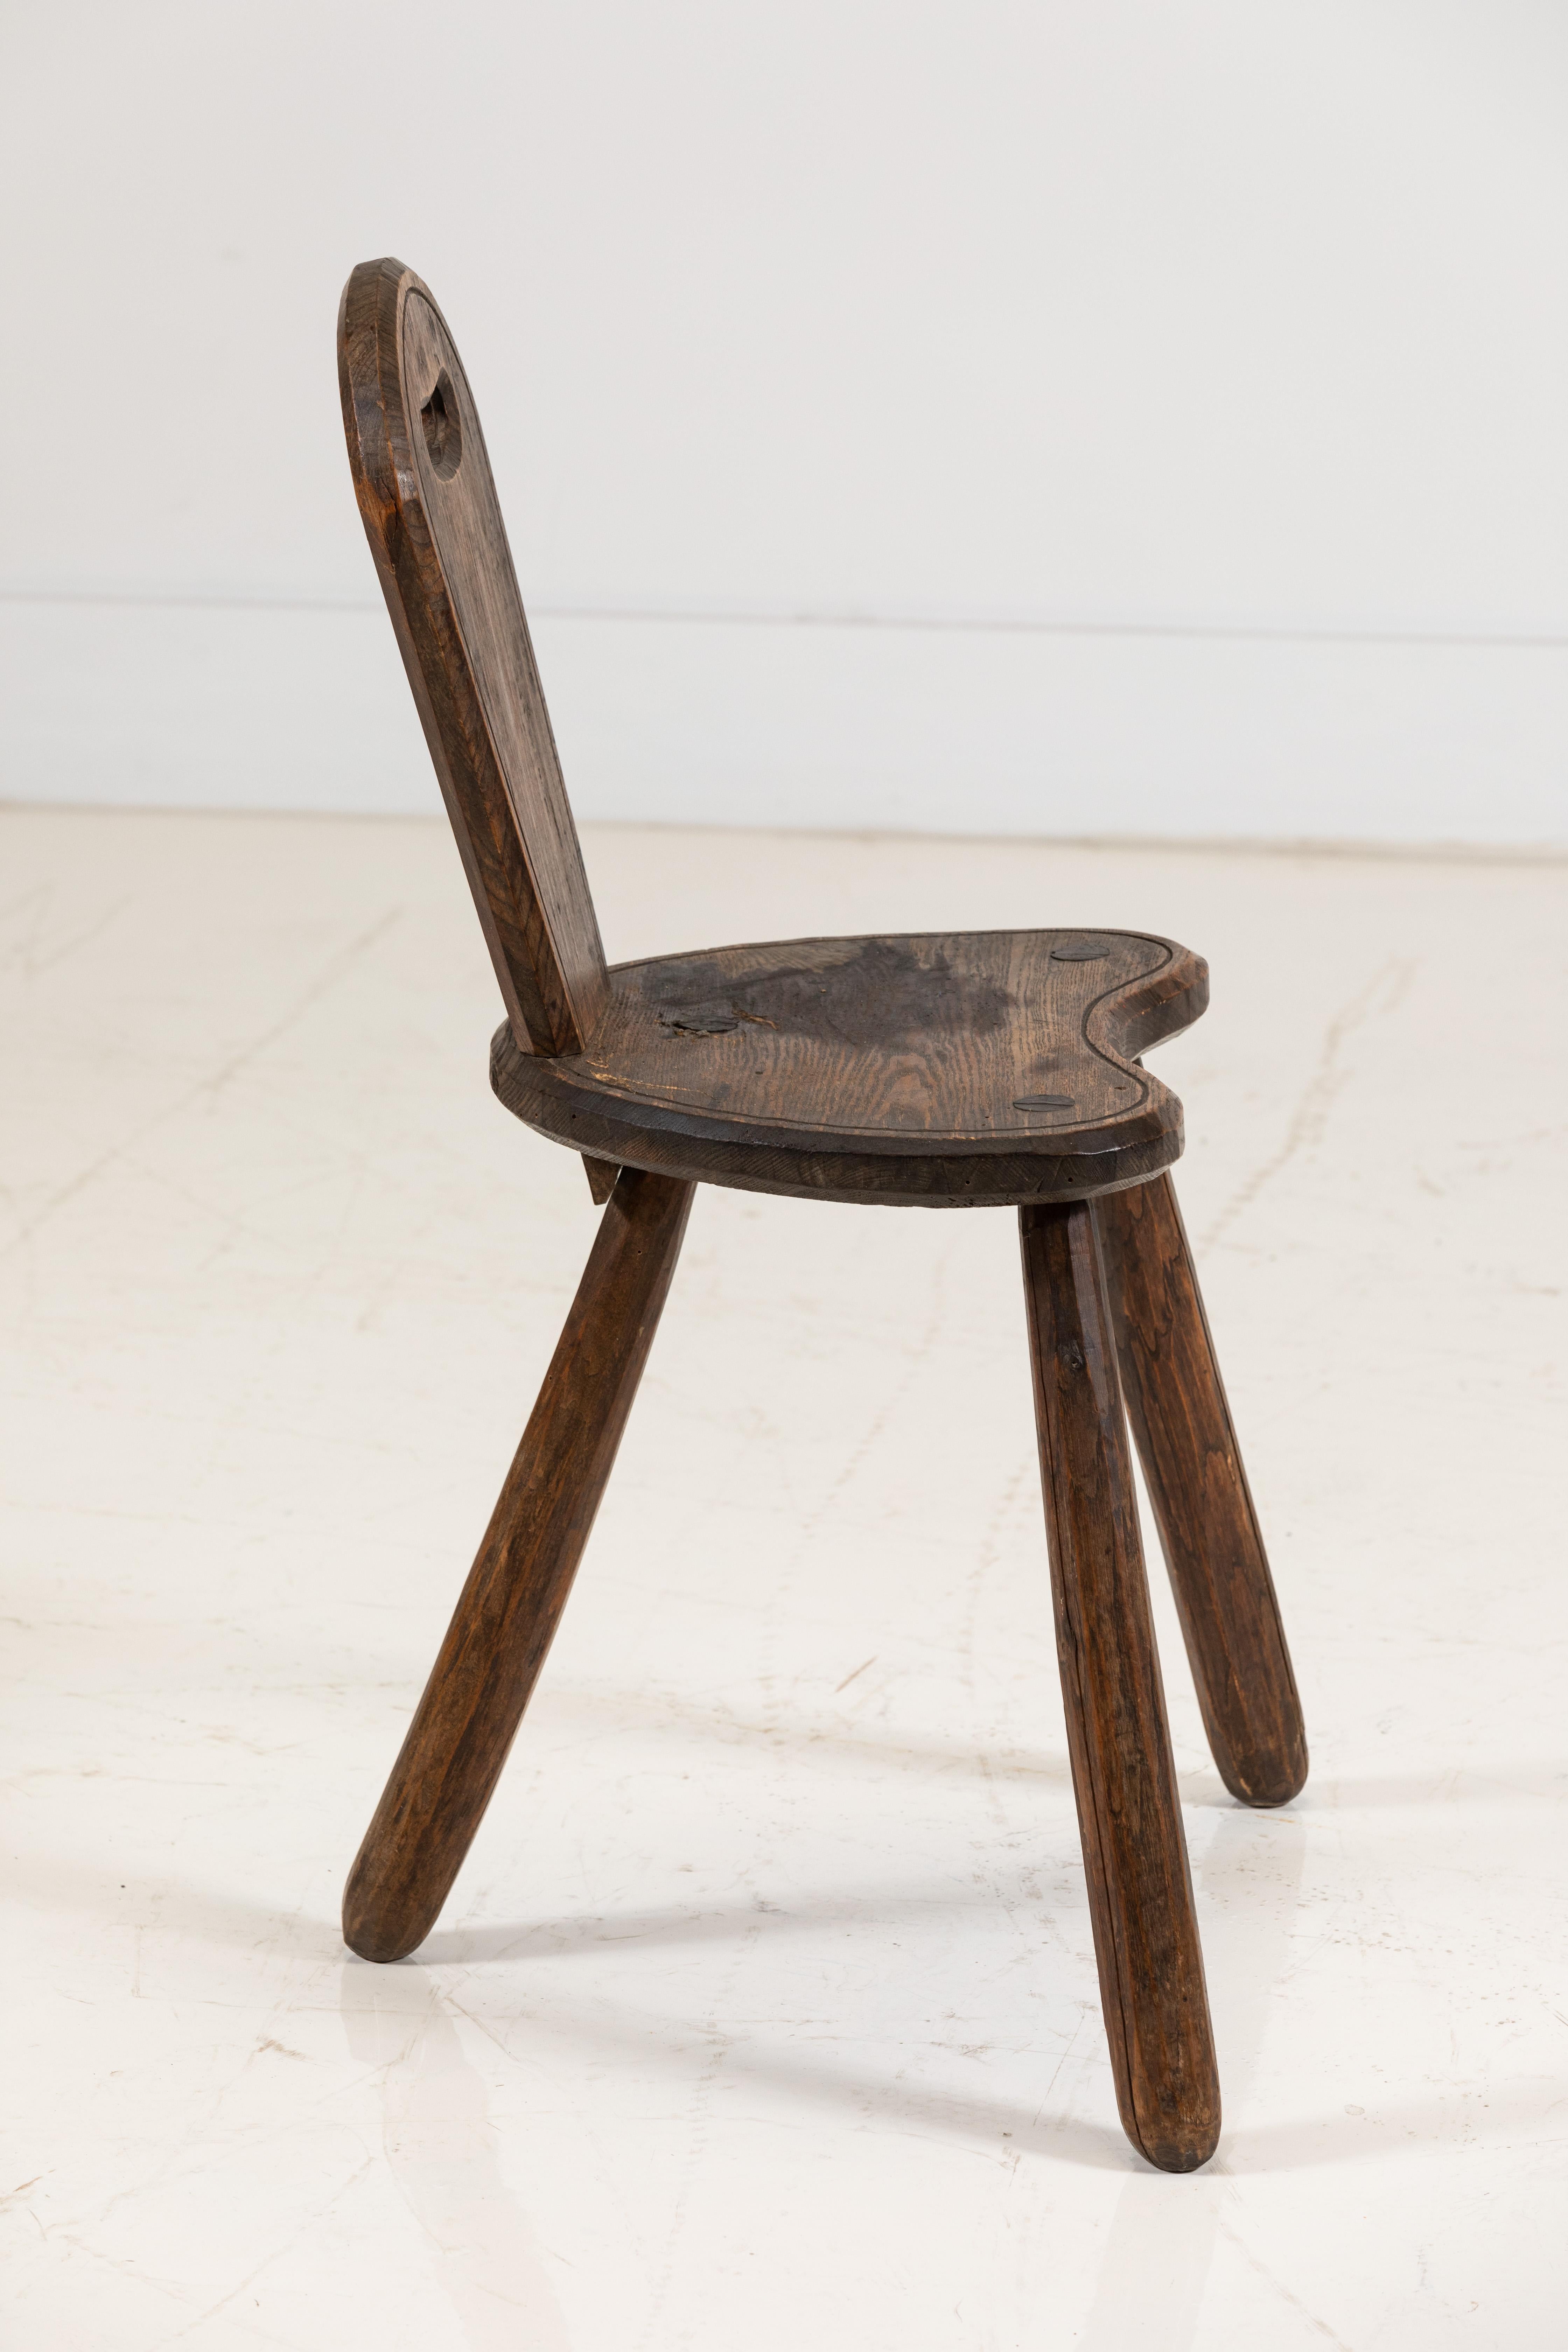 Unique wooden chair with three legs and a single back panel. The chair has an Austrian Tyrolean Classic style.